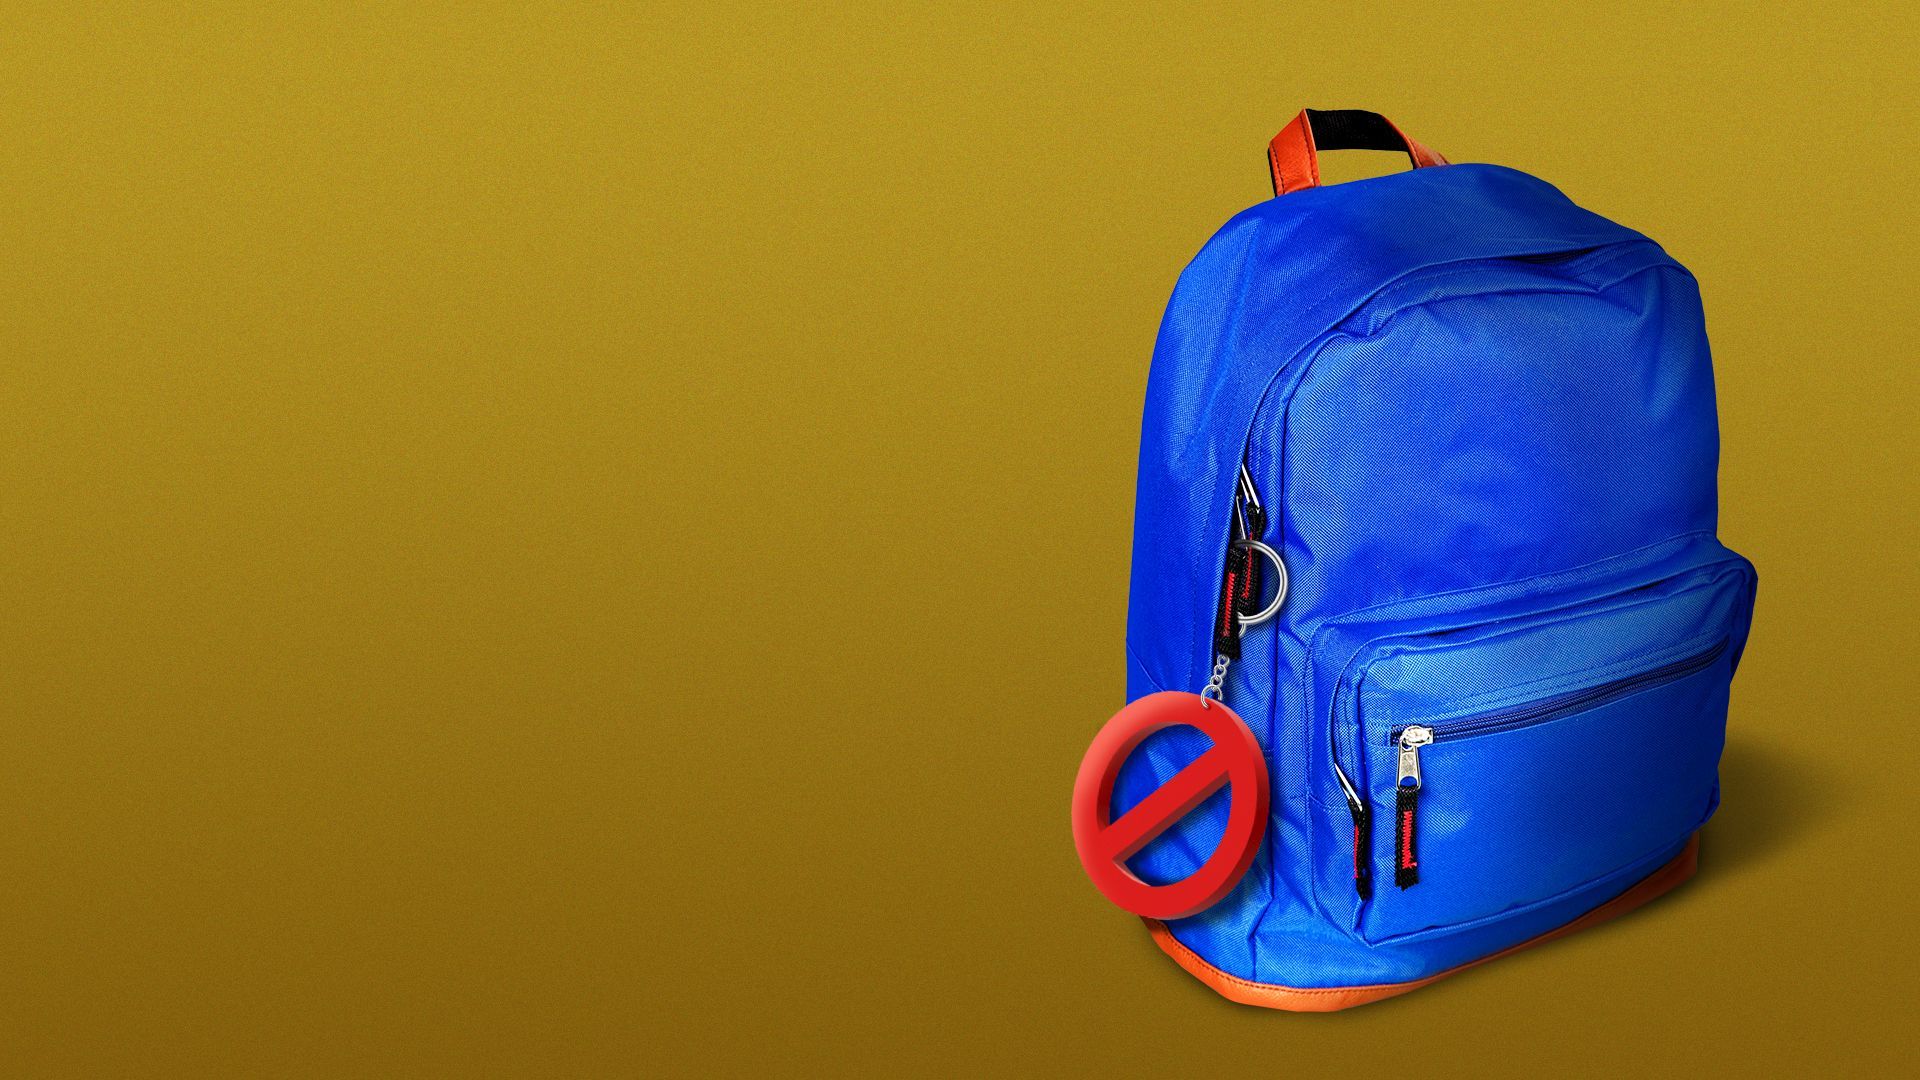 Illustration of a backpack with a "no" symbol keychain attached to it.